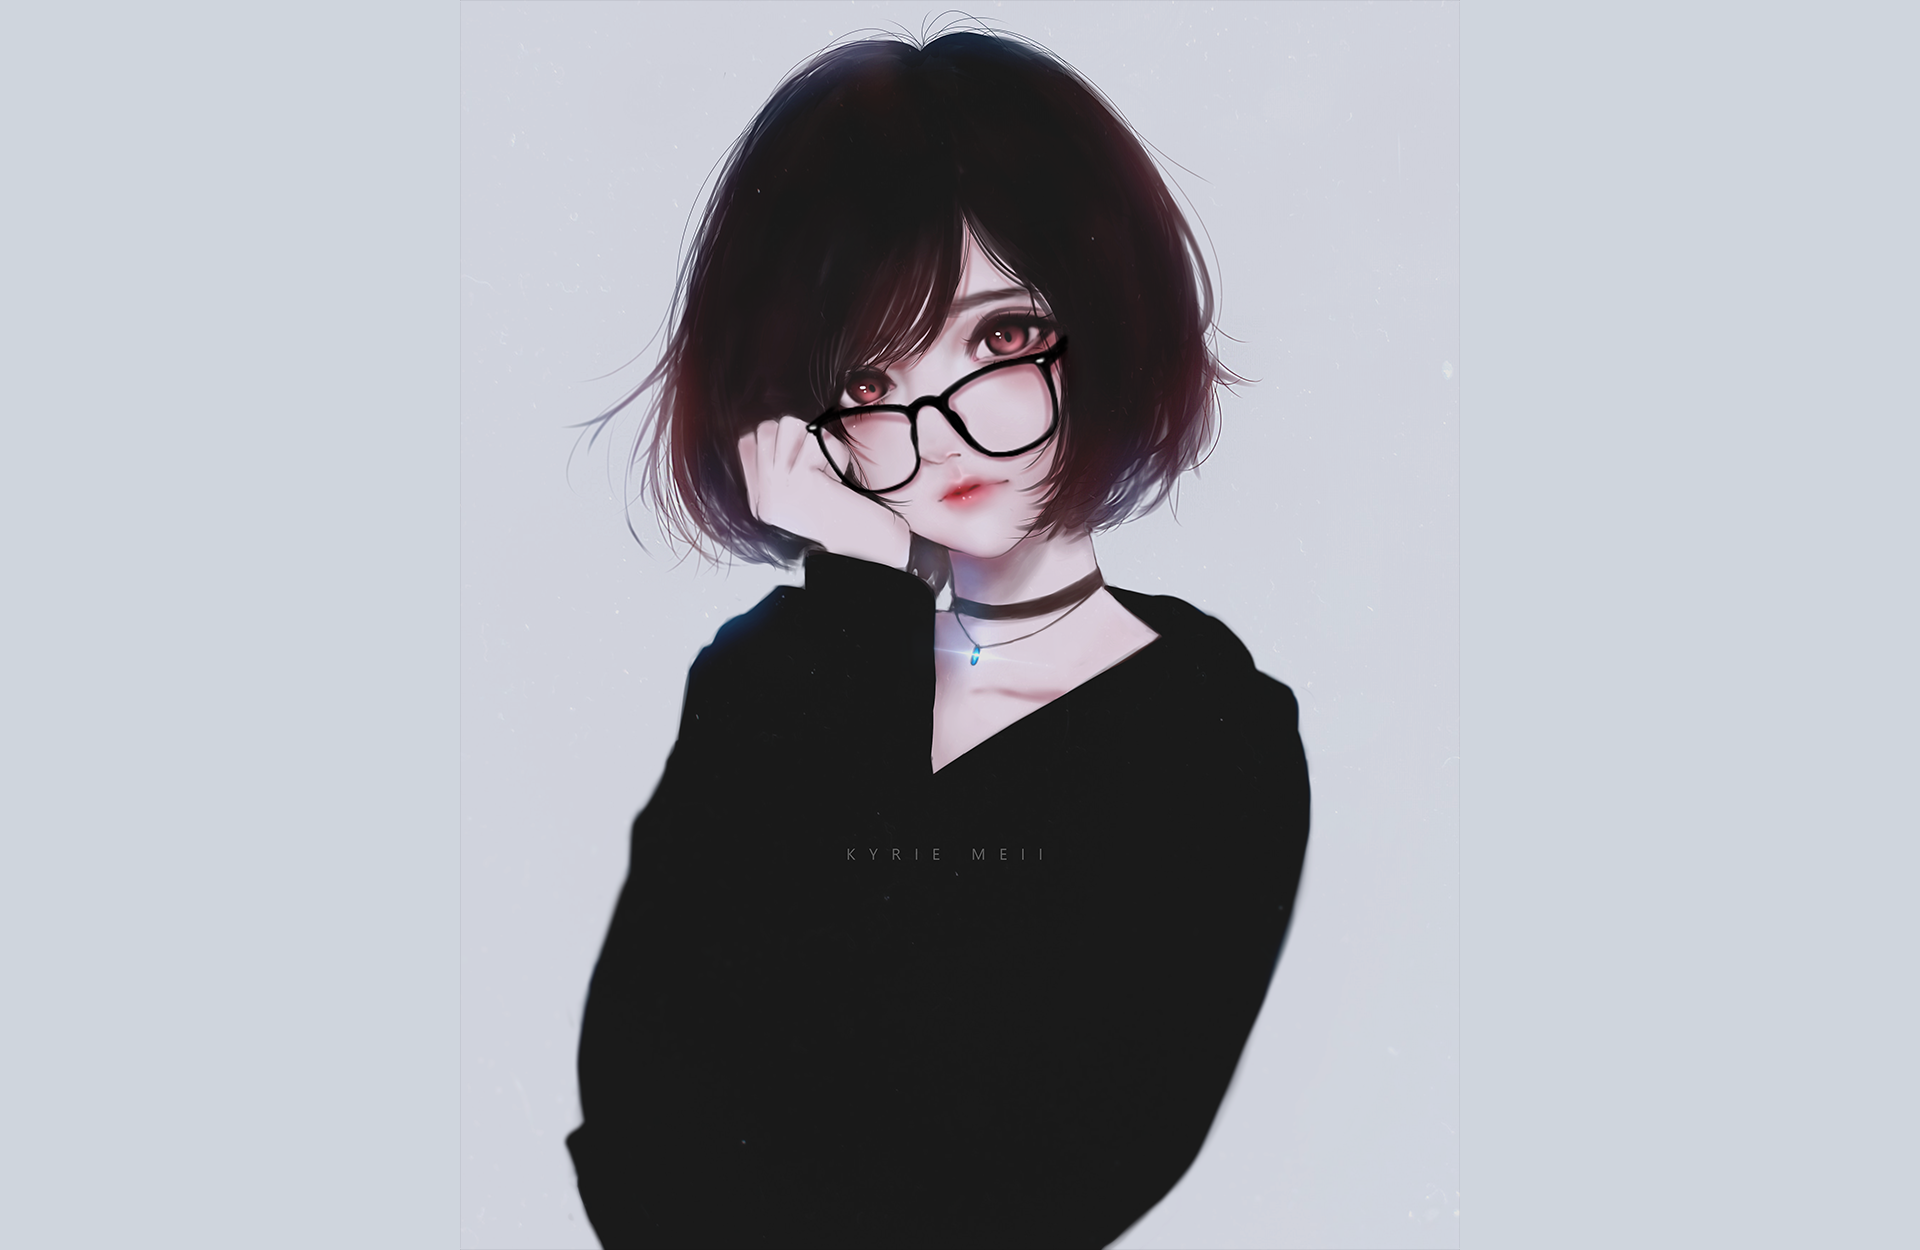 Cute Anime Girls Glasses Wallpapers - Wallpaper Cave